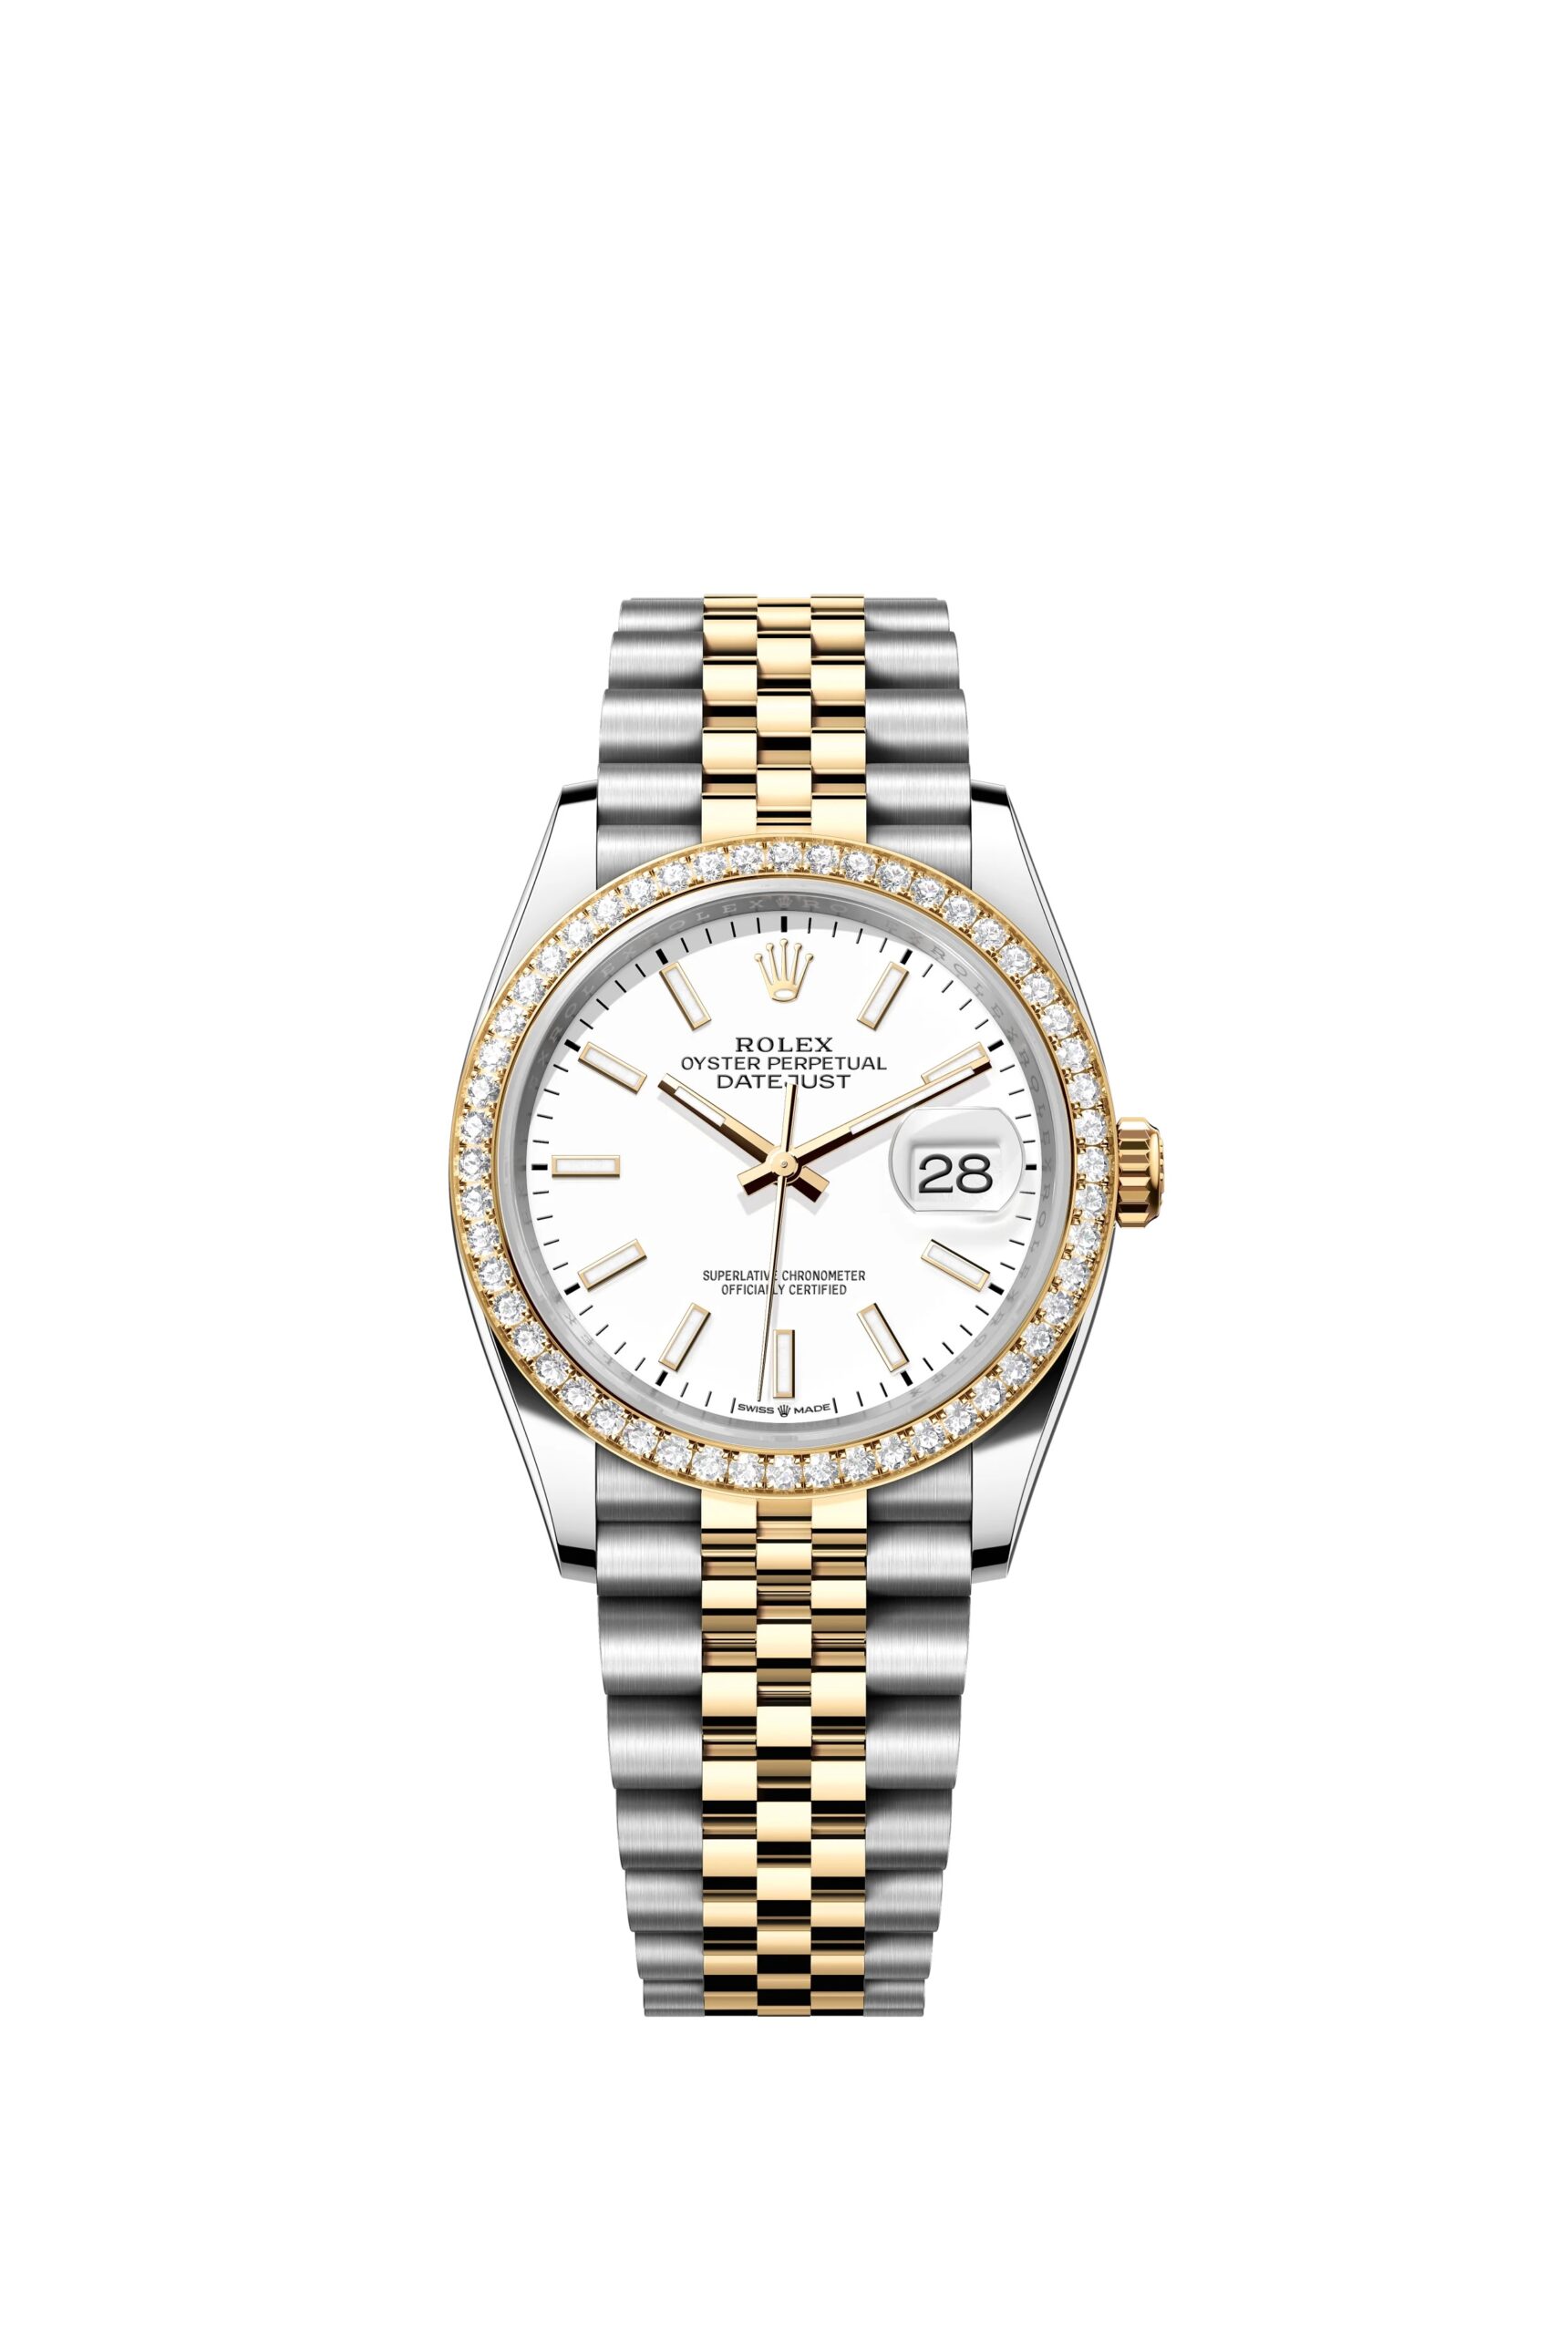 Rolex Datejust 36 Oyster, 36 mm, Oystersteel, yellow gold and diamonds Reference 126283RBR